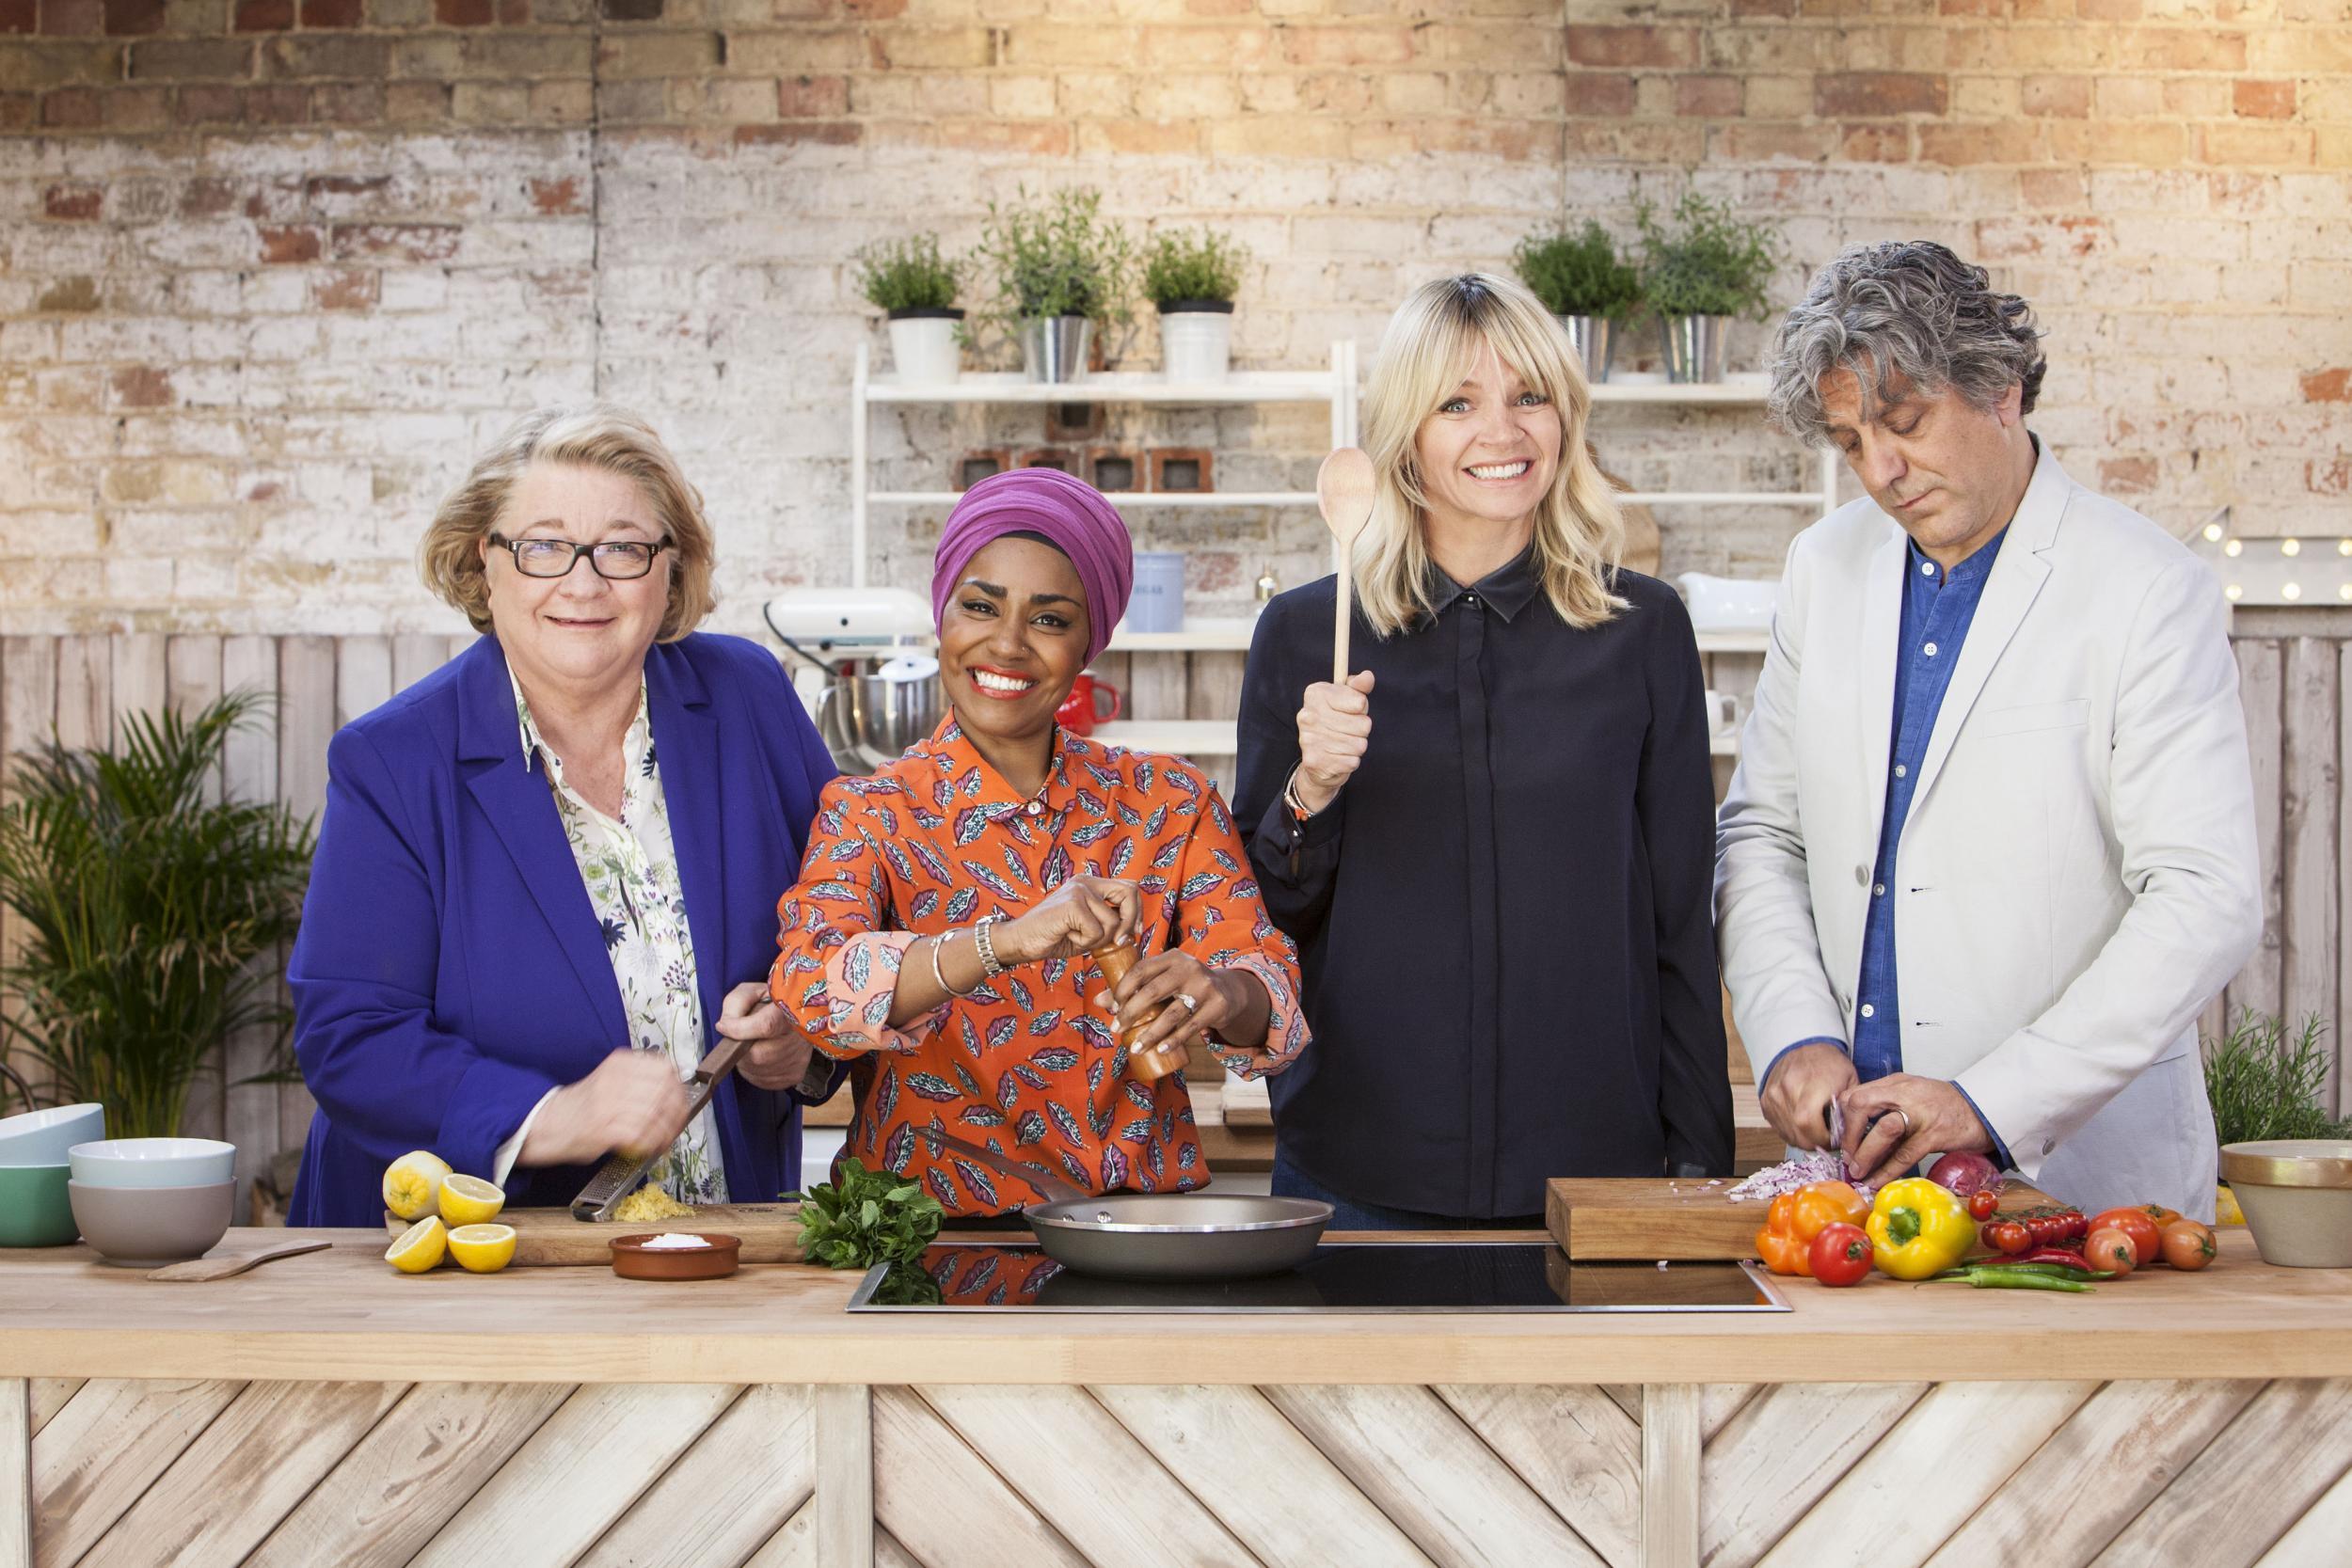 BBC accuses Channel 4 of cynically moving Great British Bake Off to clash with its new baking show